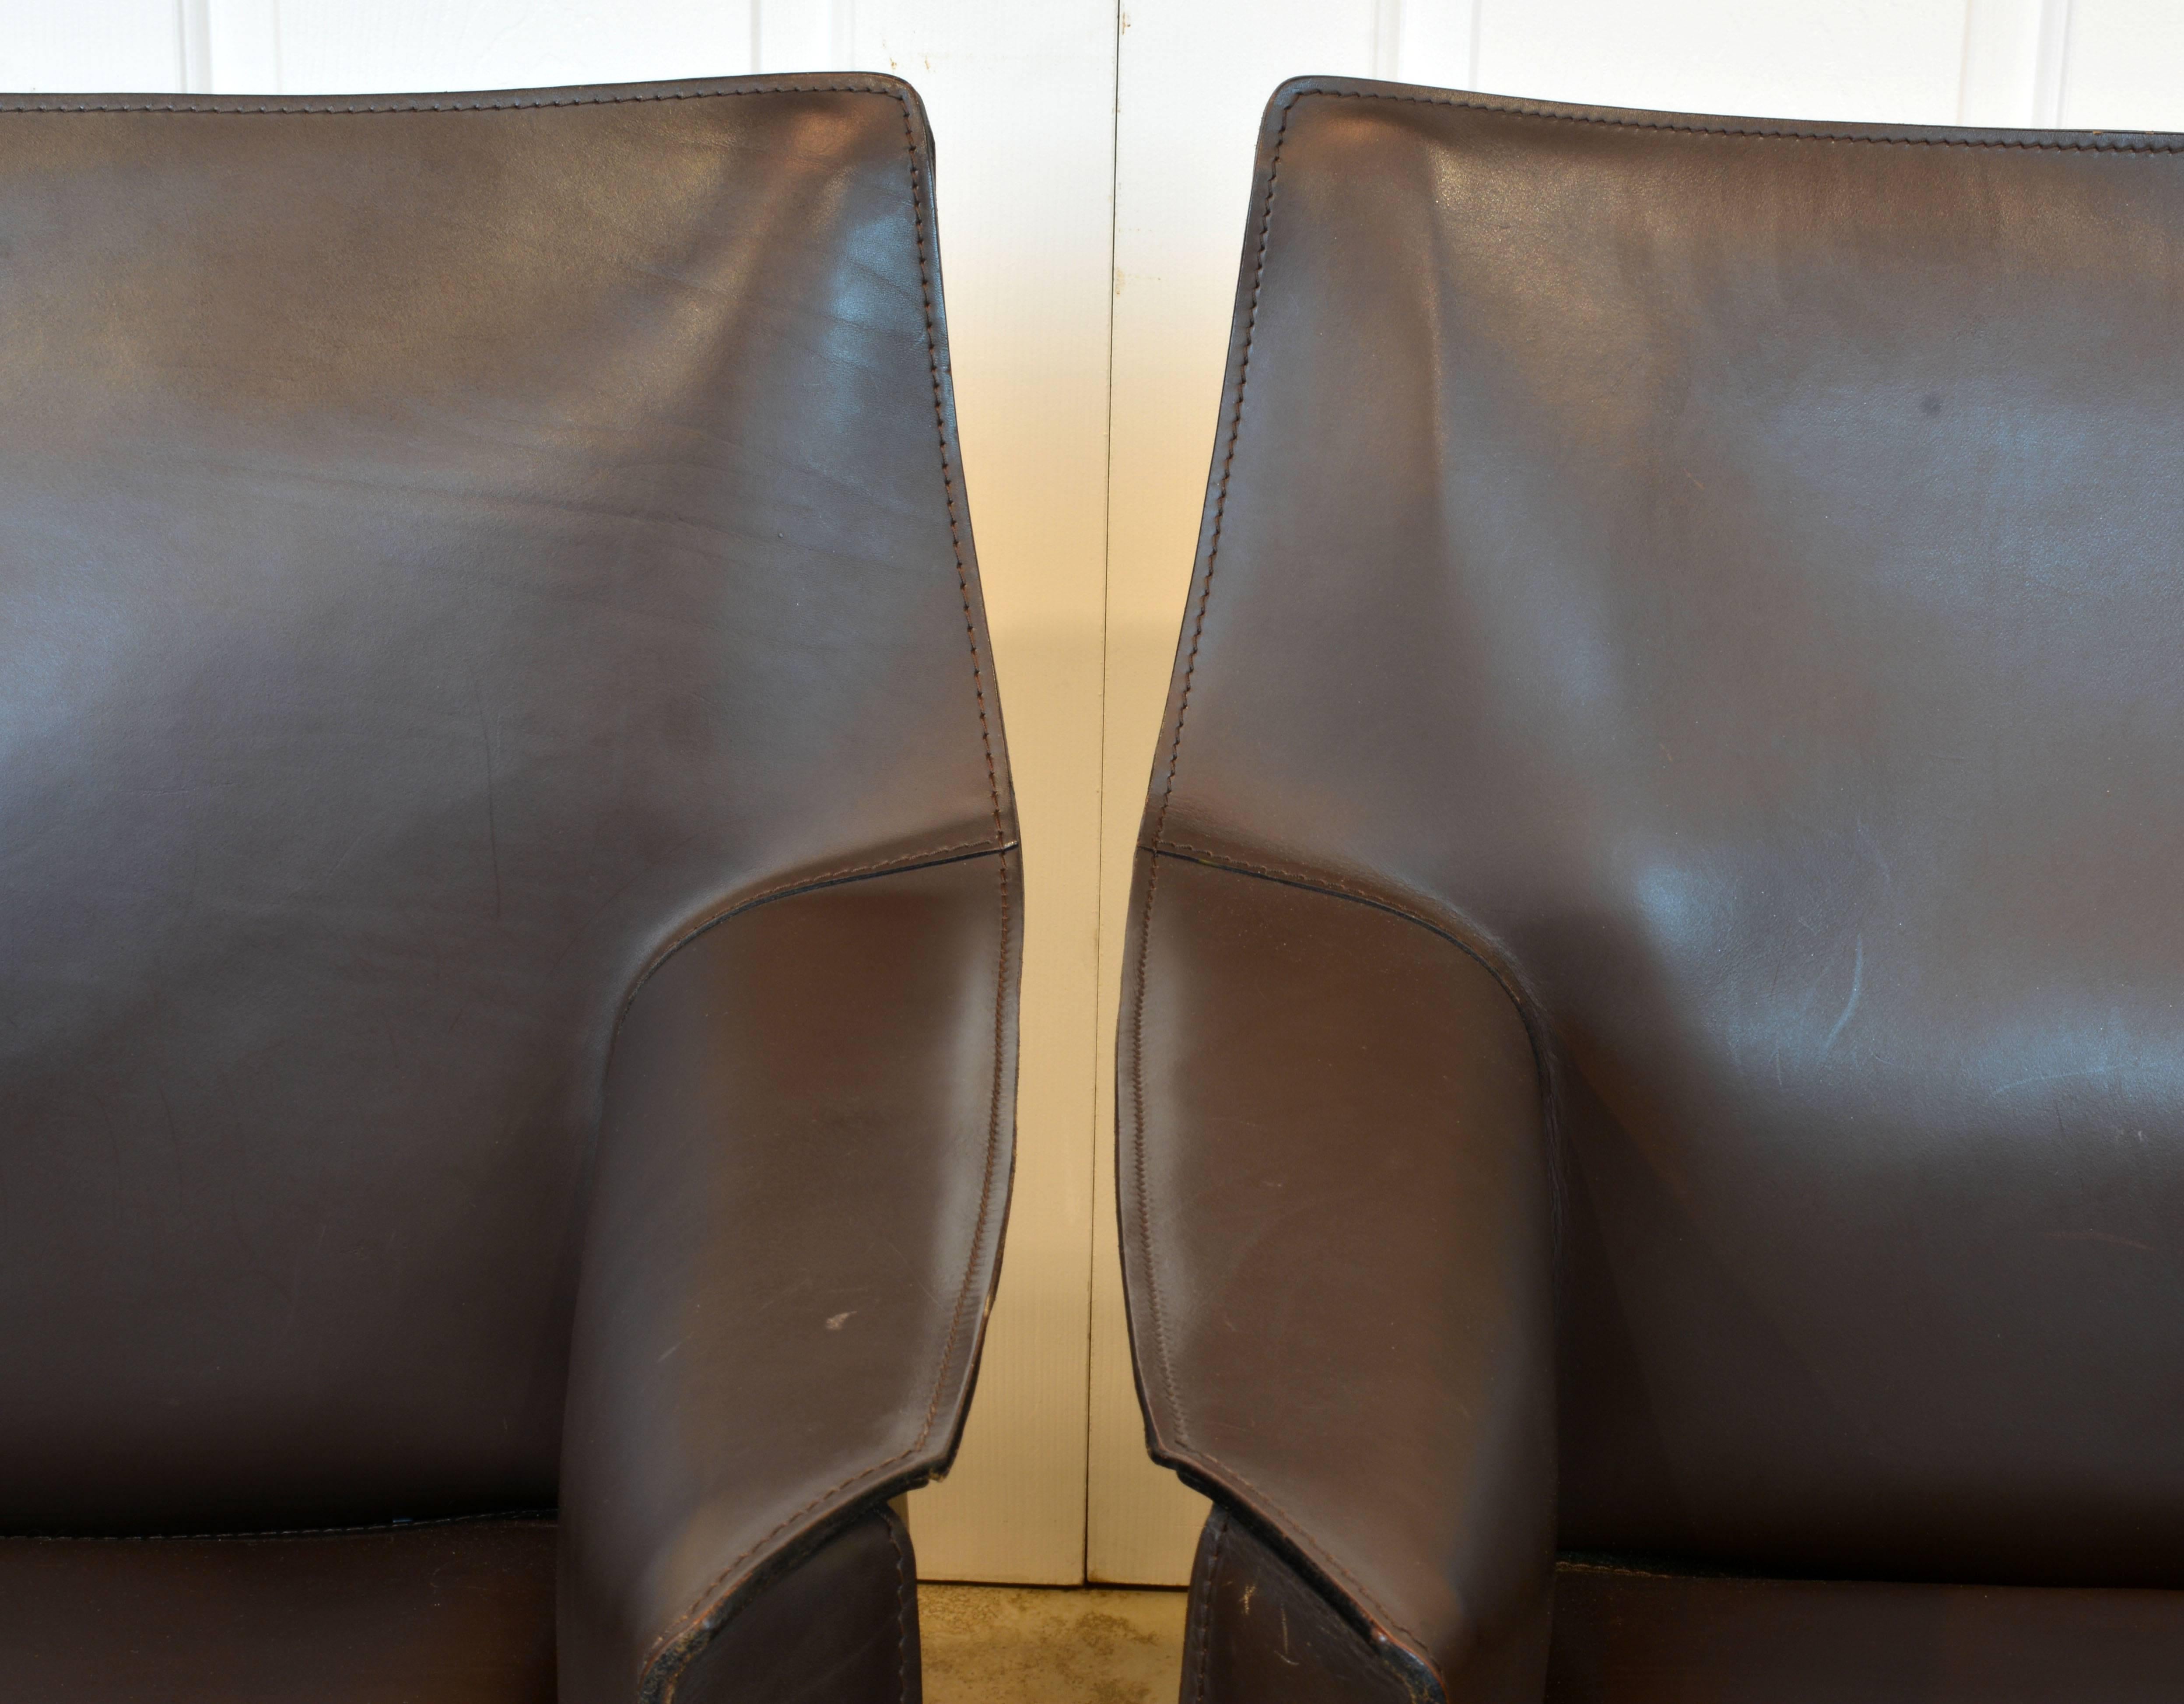 Pair of Mario Bellini Design Leather Cab Lounge Chairs by Cassina, Italy 1